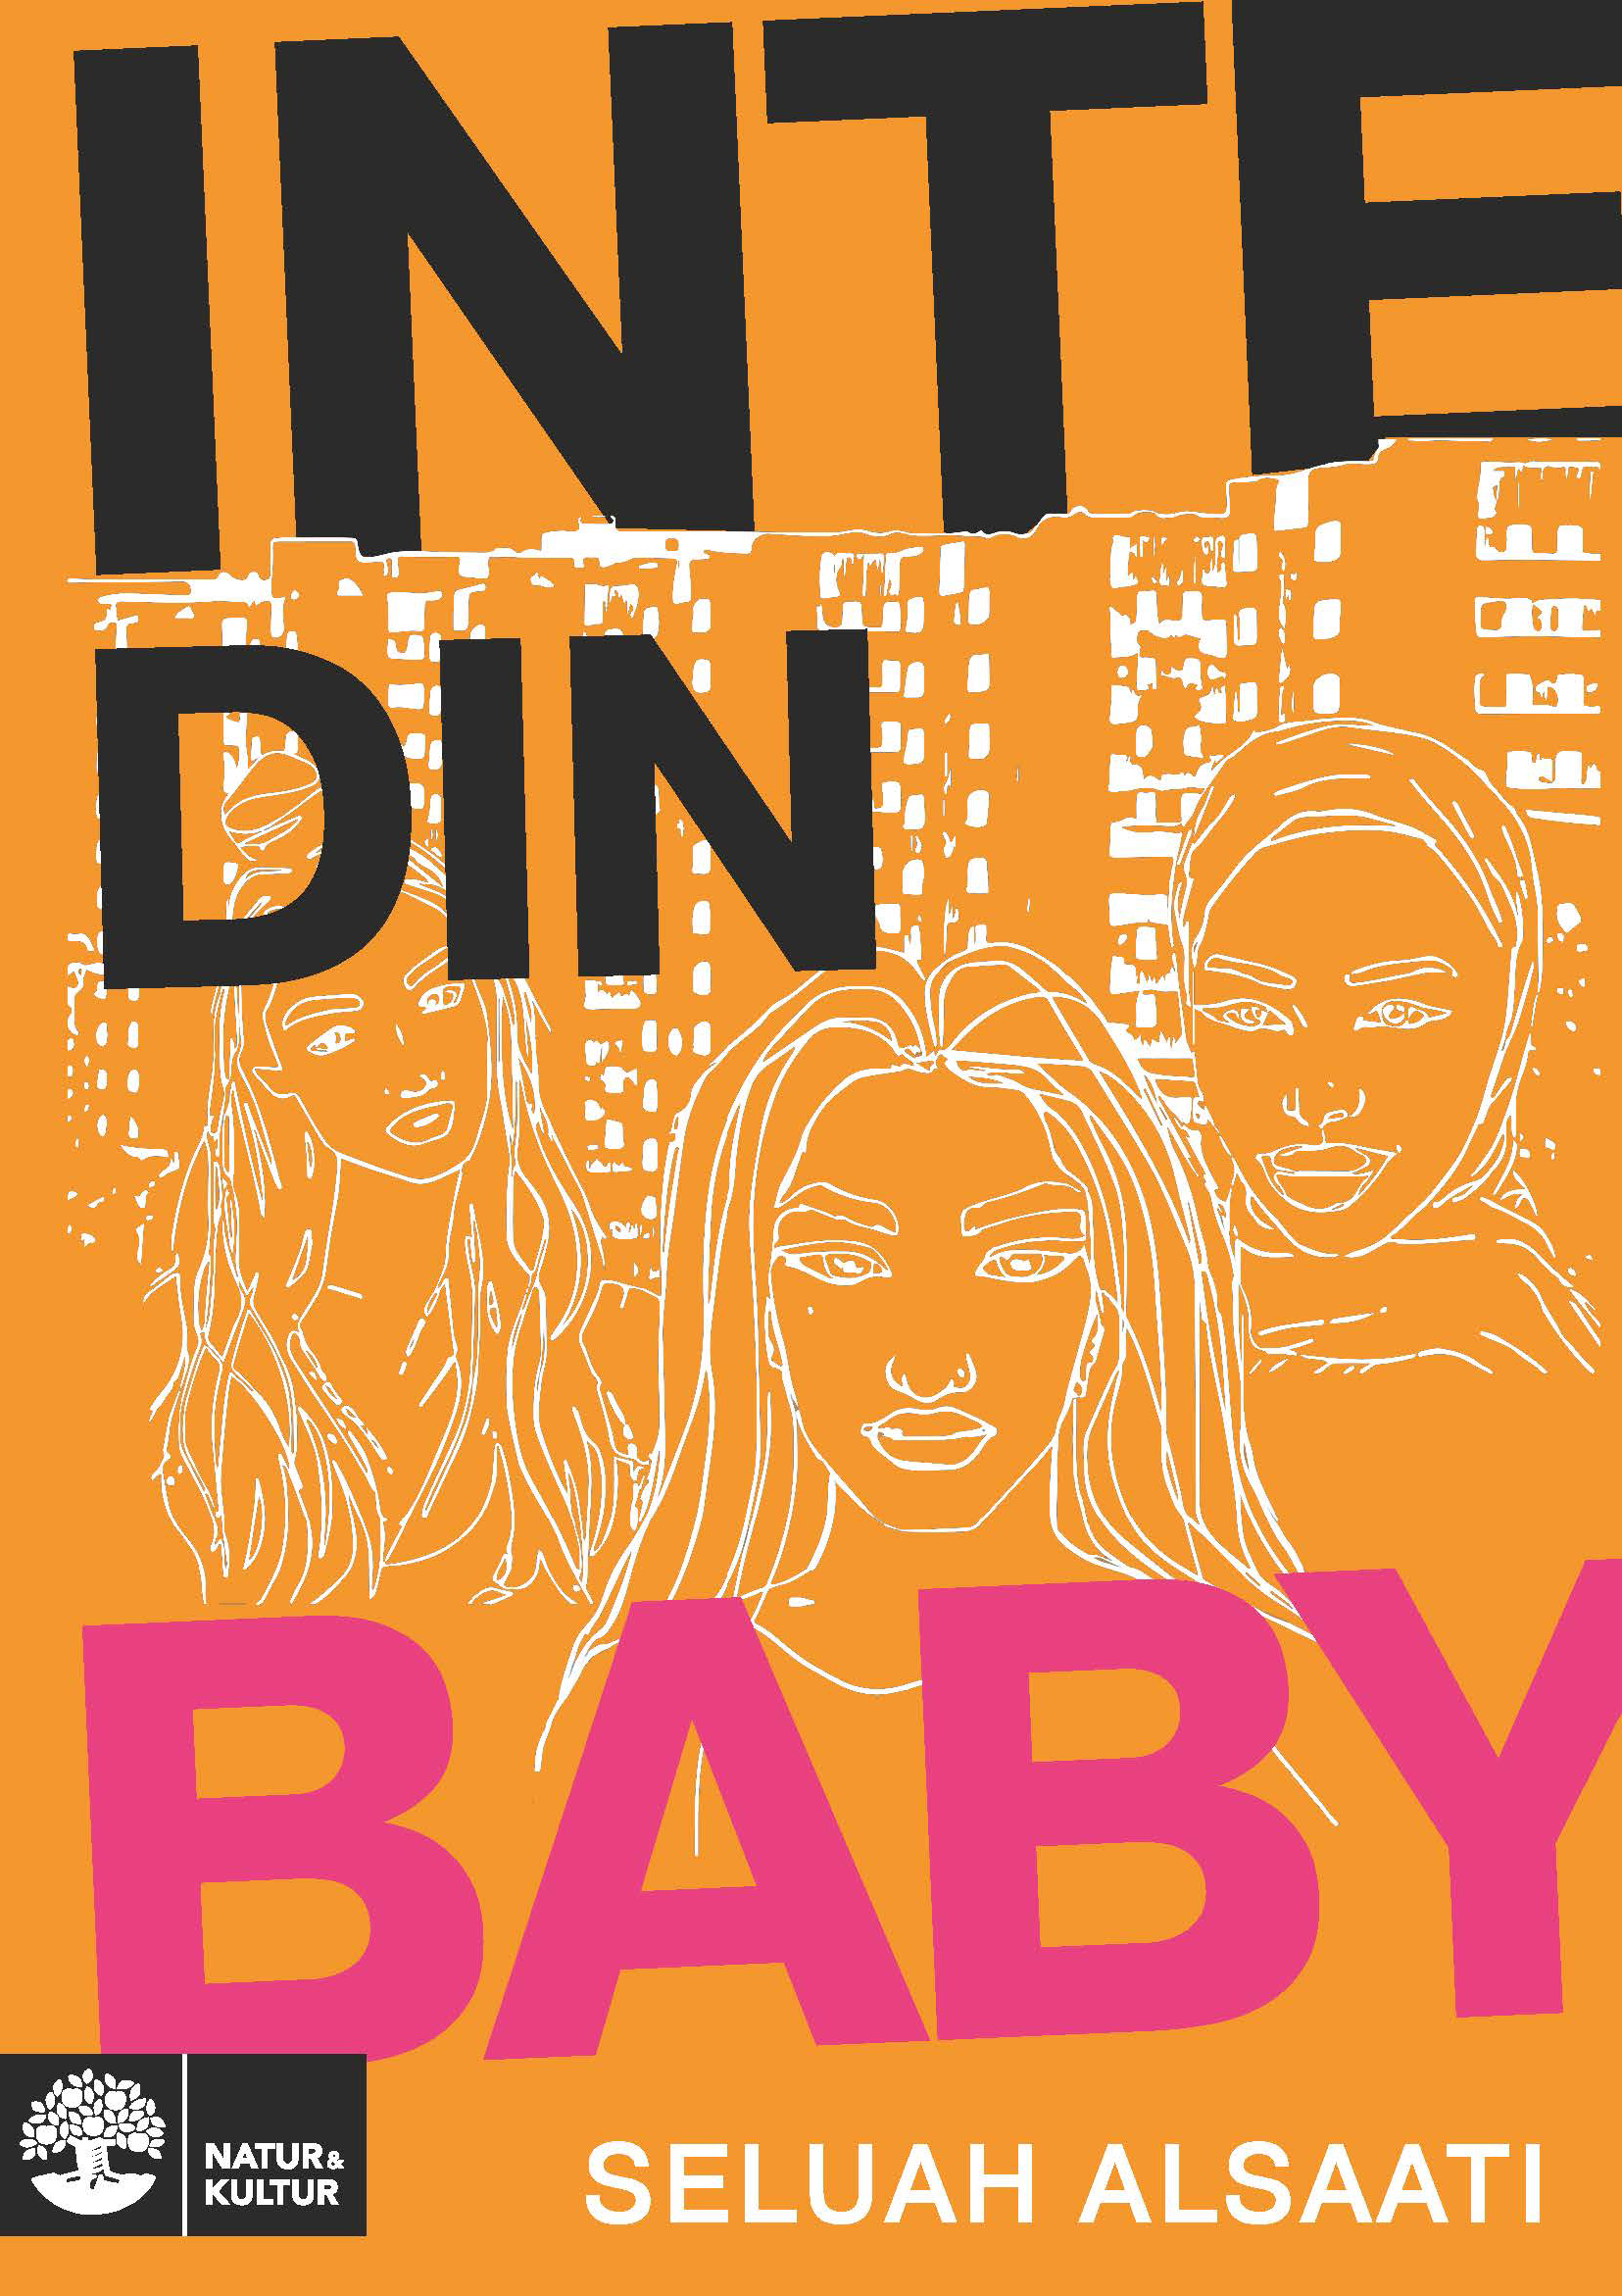 Book cover Inte din baby ('Not Your Baby') by Seluah Alsaati